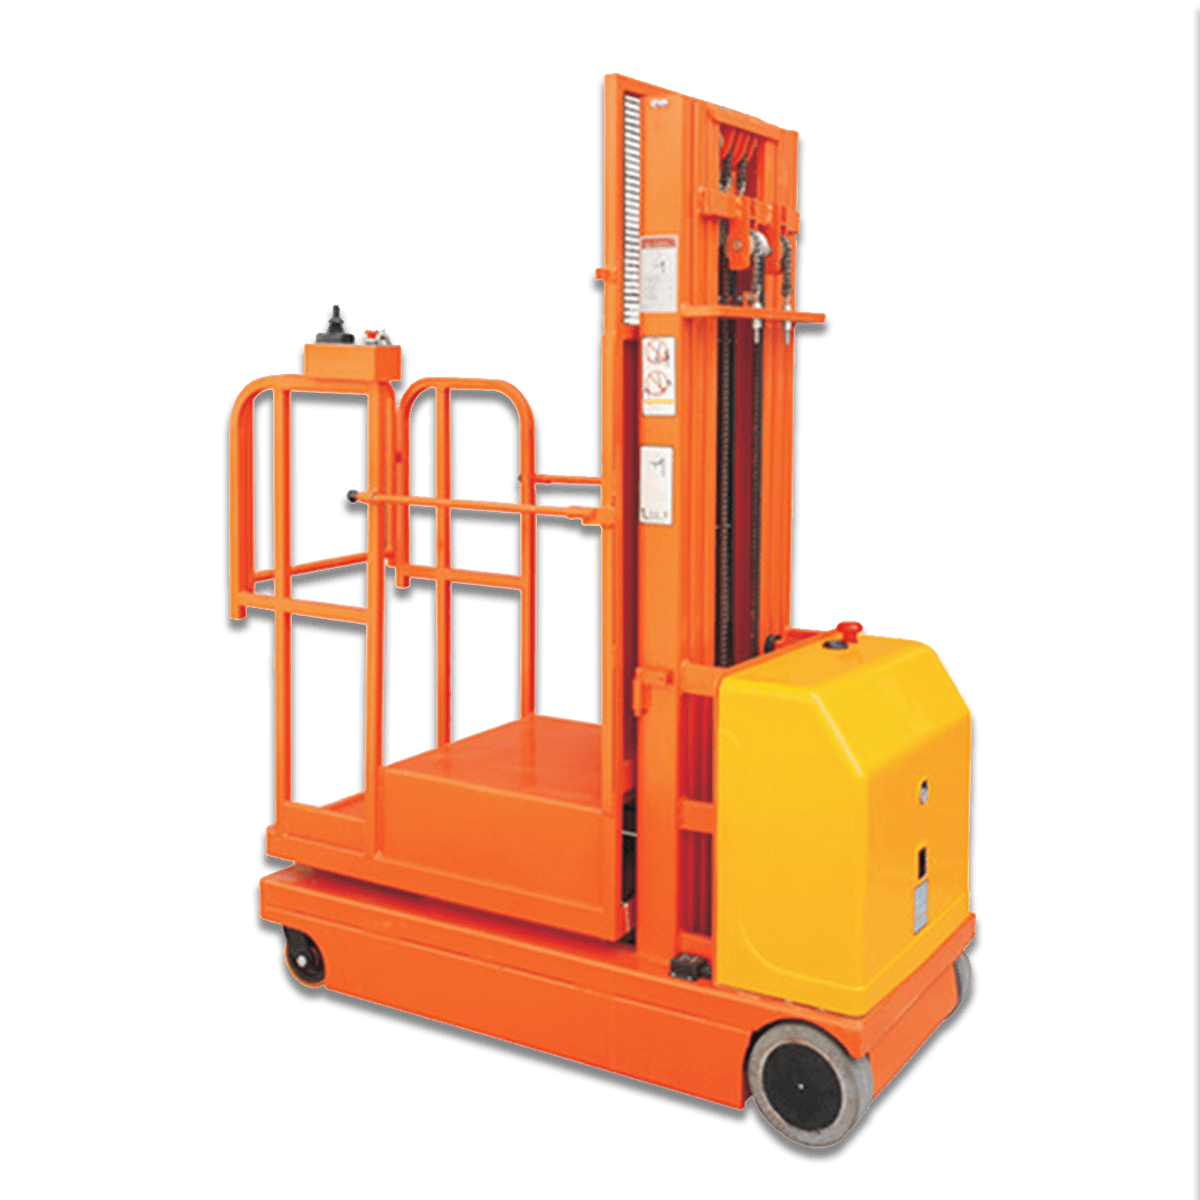 What are the main components of a manual stacker, and how do they contribute to its operation?